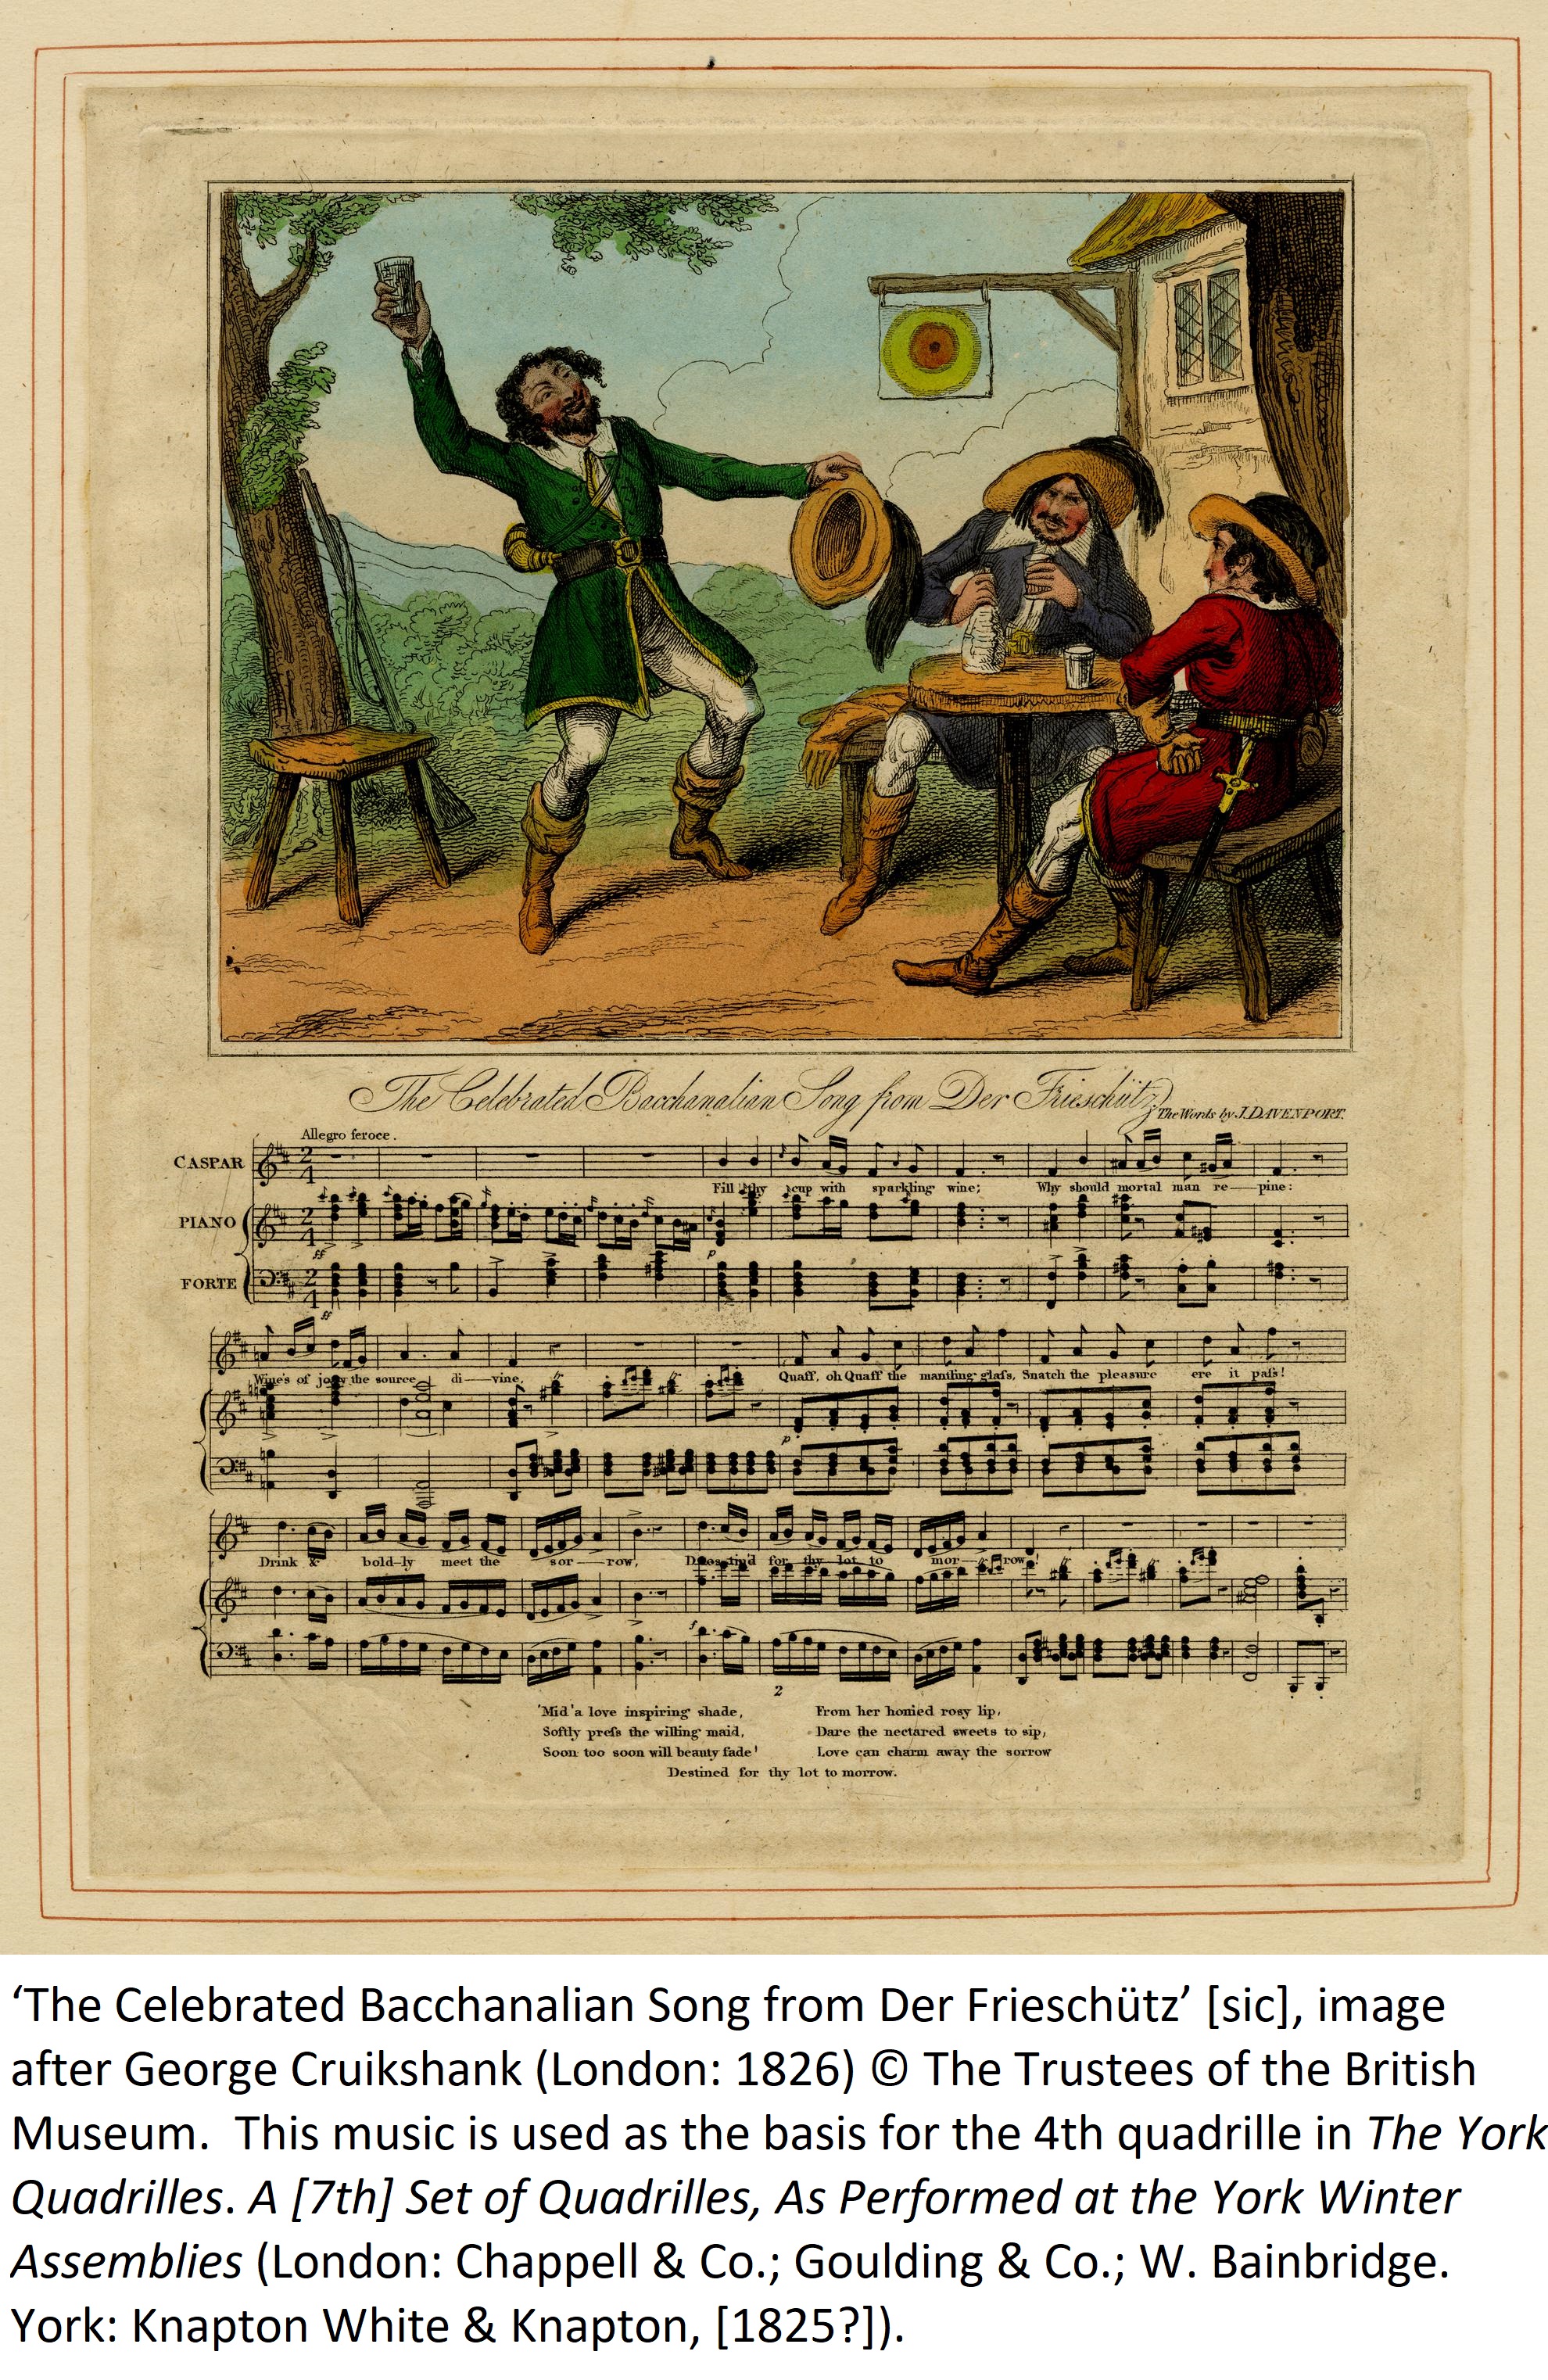  ‘The Celebrated Bacchanalian Song from Der Frieschütz’ [sic], image after George Cruikshank (London: 1826) © The Trustees of the British Museum.  This music is used as the basis for the 4th quadrille in The York Quadrilles. A [7th] Set of Quadrilles, As Performed at the York Winter Assemblies (London: Chappell & Co.; Goulding & Co.; W. Bainbridge. York: Knapton White & Knapton, [1825?]).